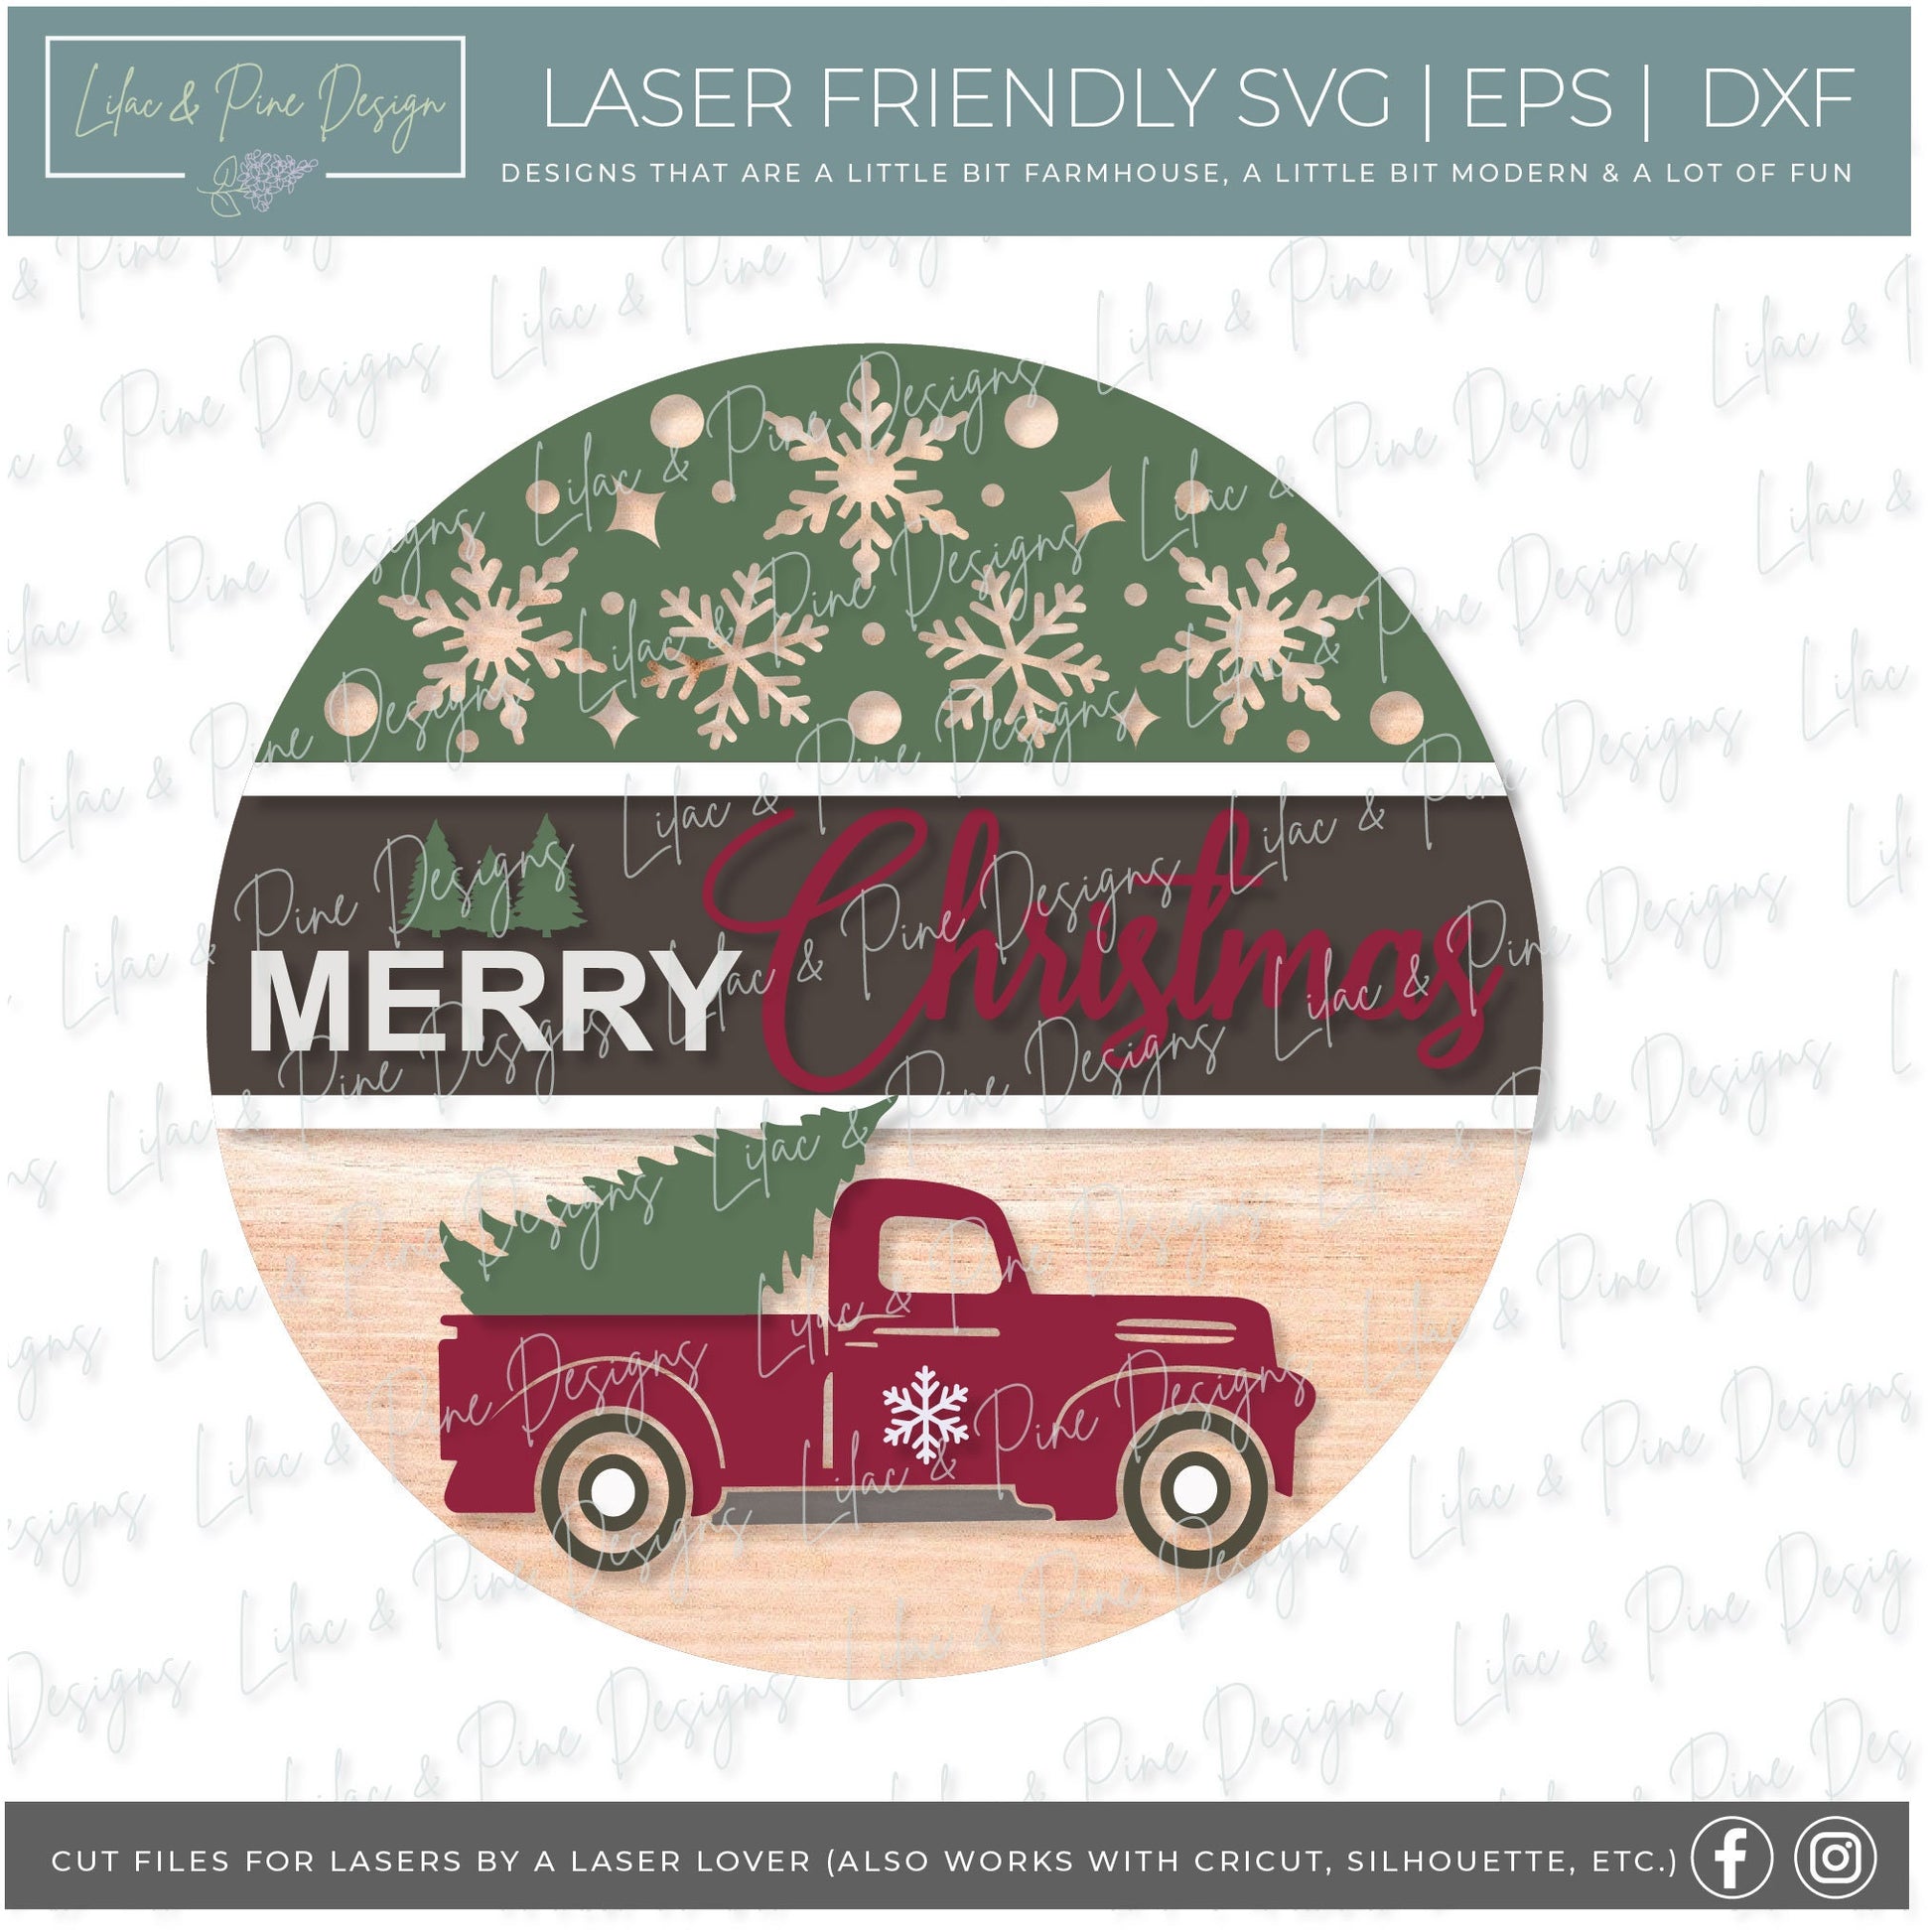 Vintage Truck Merry Christmas  sign, Country Christmas SVG, Farmhouse Christmas  SVG,  Christmas Welcome svg, laser cut file, Glowforge SVG